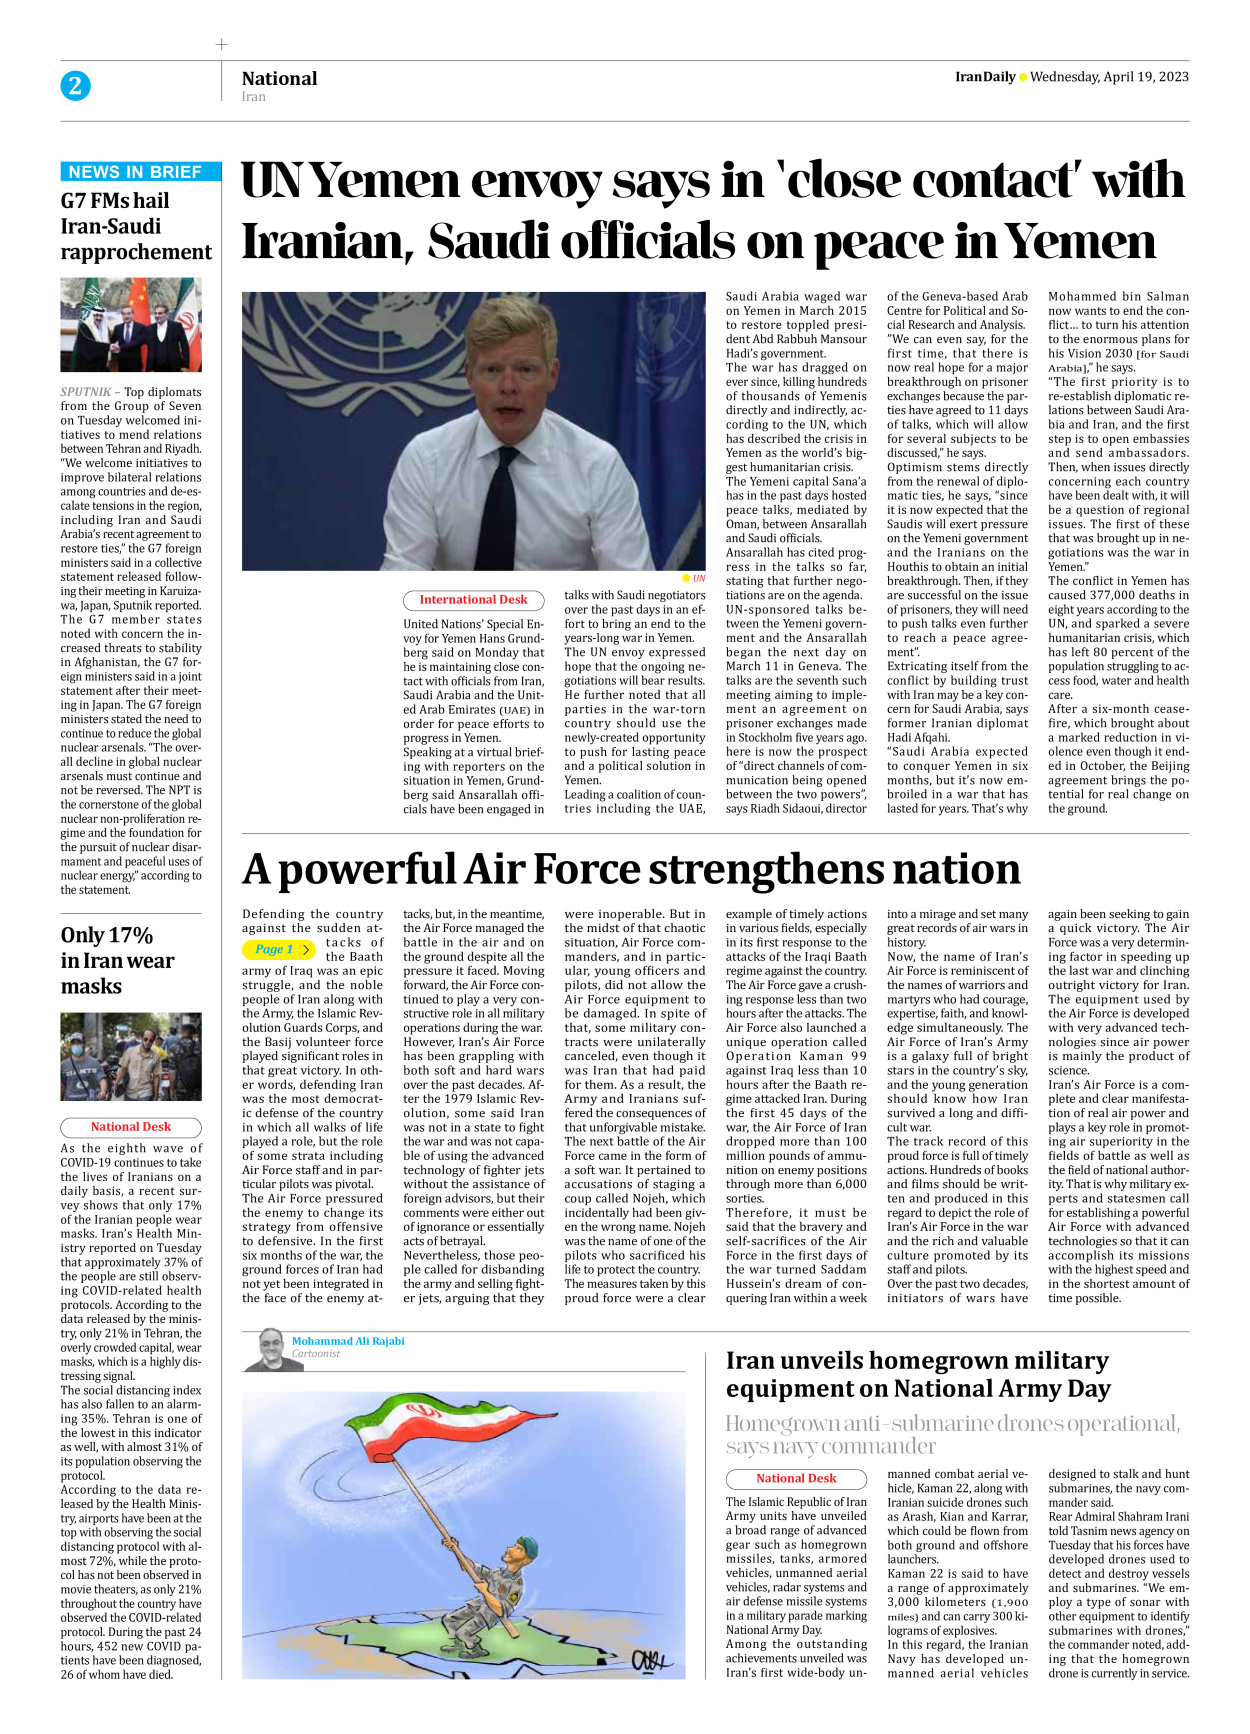 Iran Daily - Number Seven Thousand Two Hundred and Seventy Two - 19 April 2023 - Page 2